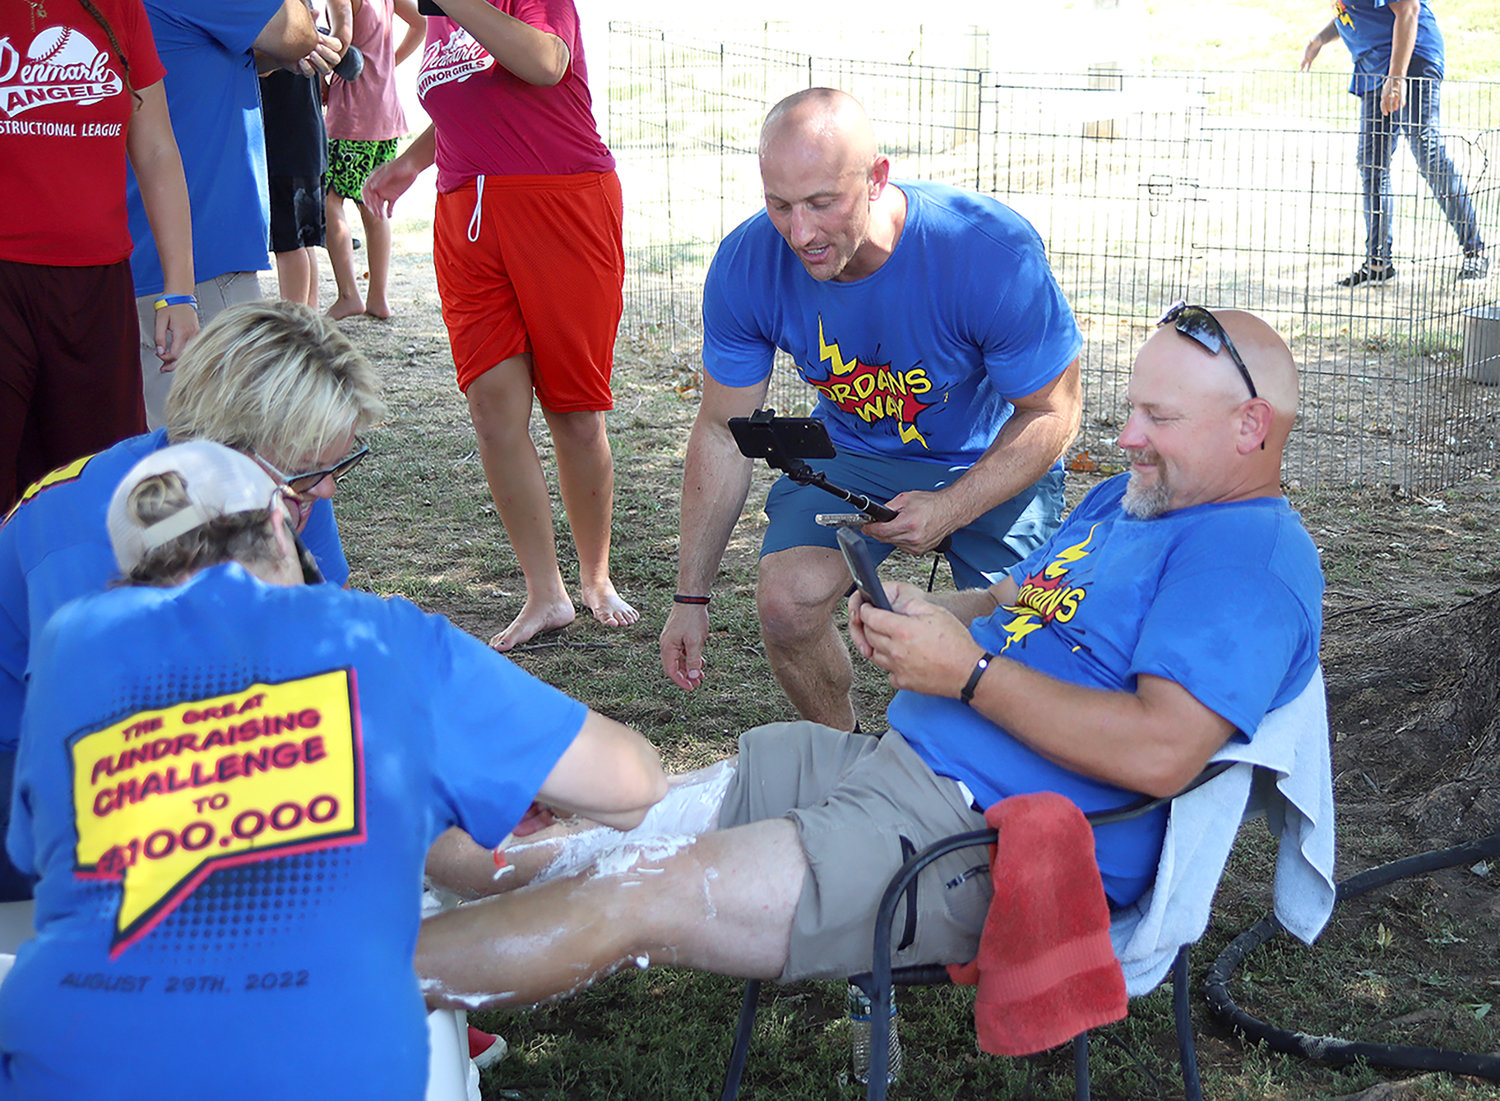 Fort Madison City Councilwoman Donna Amandus and PAW Animal Shelter Director Sandy Brown shave the legs of Cliff Dawley, Monday afternoon at the Jordan's Way fundraiser.